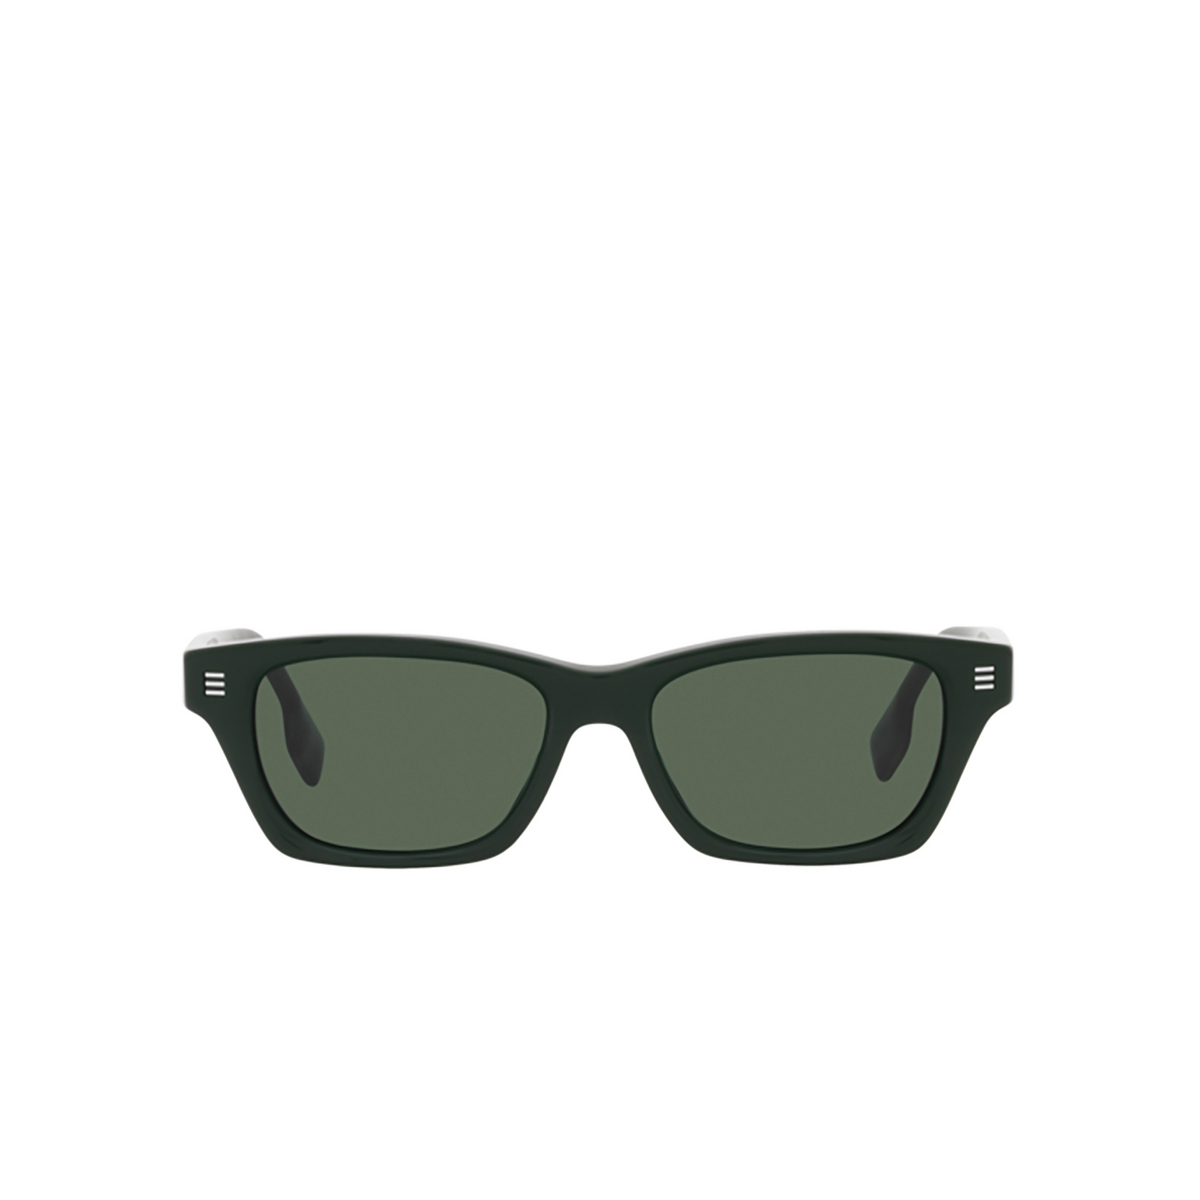 Burberry KENNEDY Sunglasses 398771 Green - front view